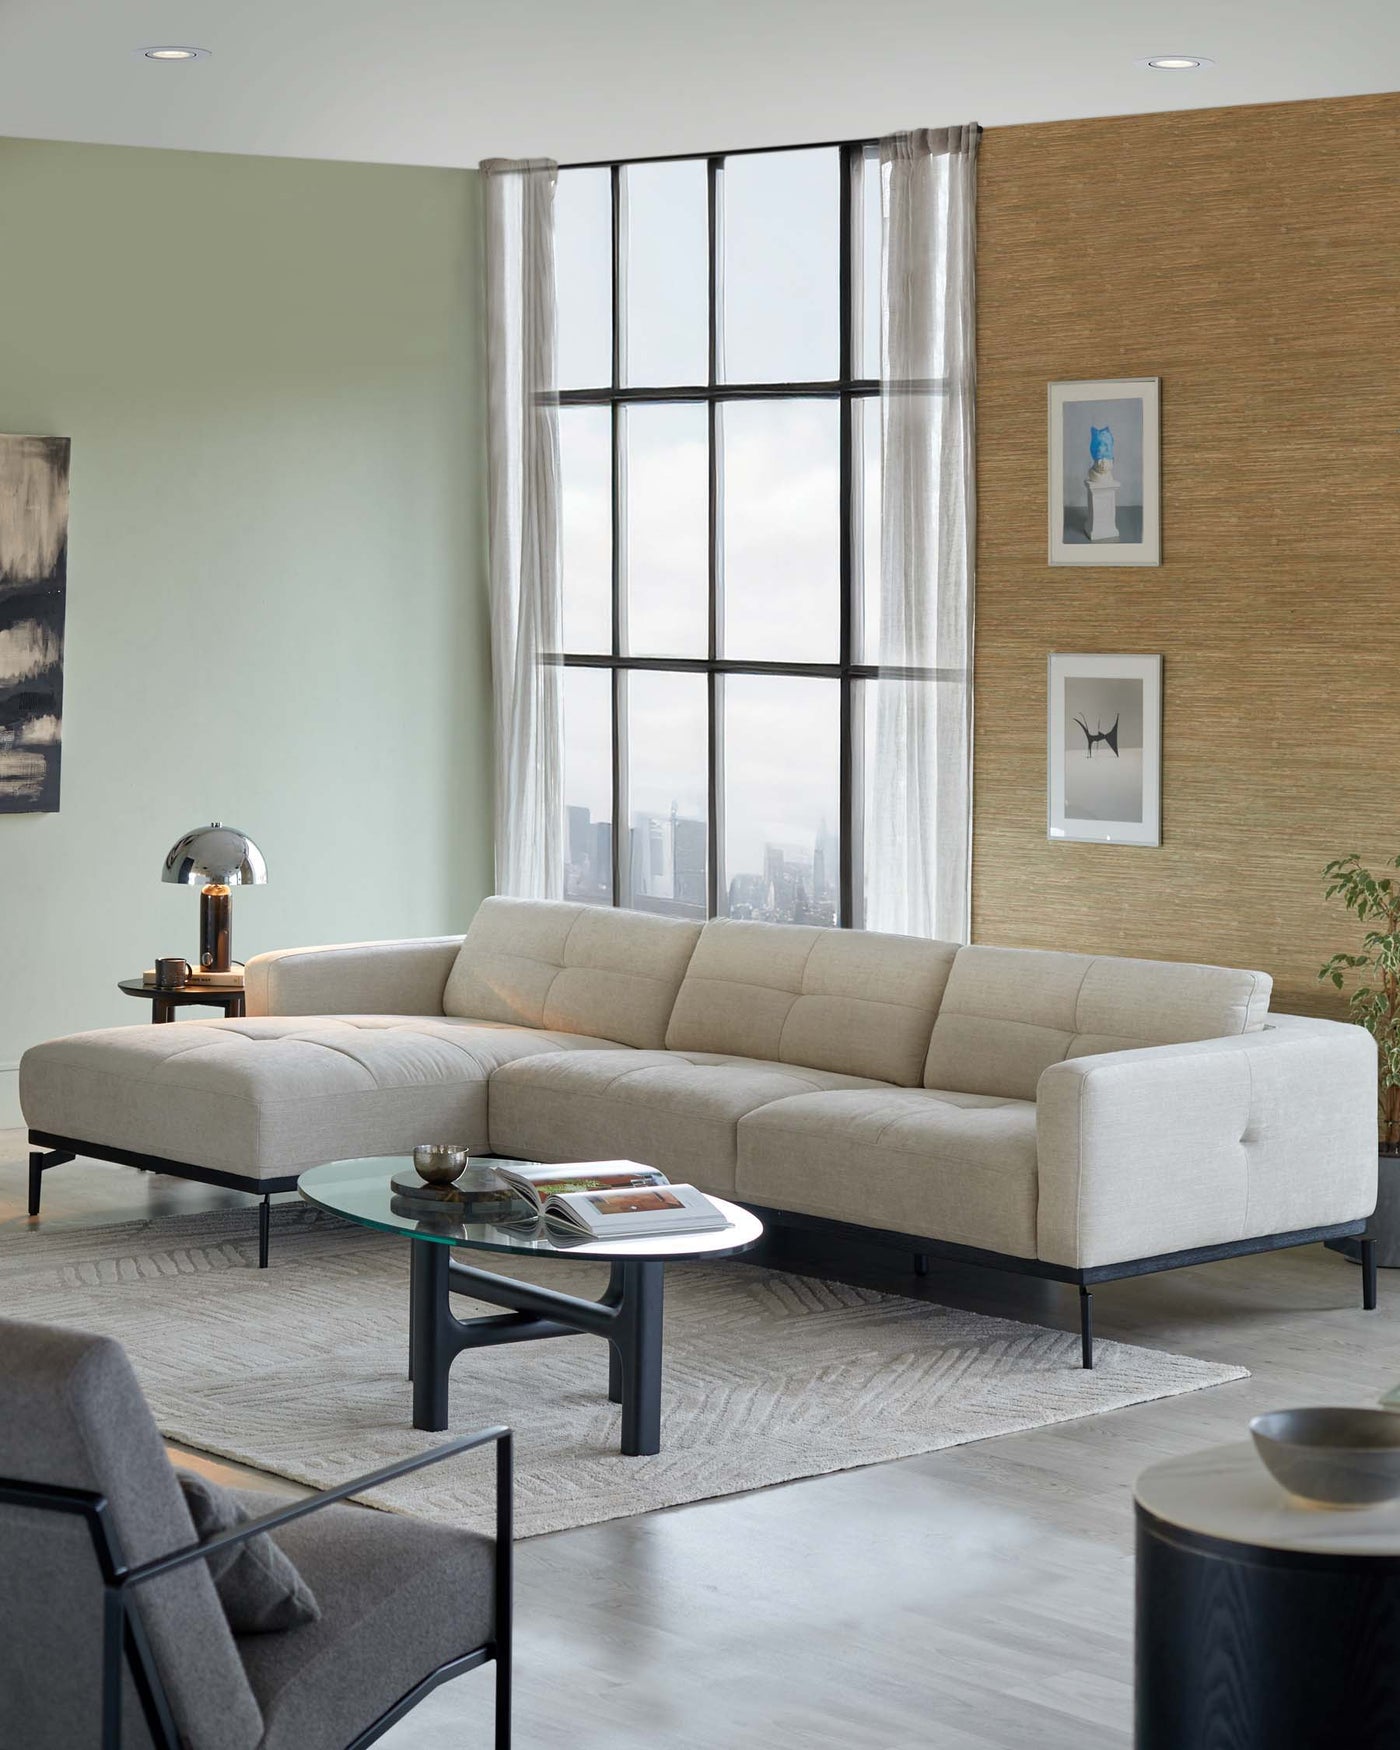 Modern sectional sofa in light beige with a minimalist design and dark tapered legs, paired with a round glass-top coffee table featuring a unique blue and black base, on a light grey area rug.